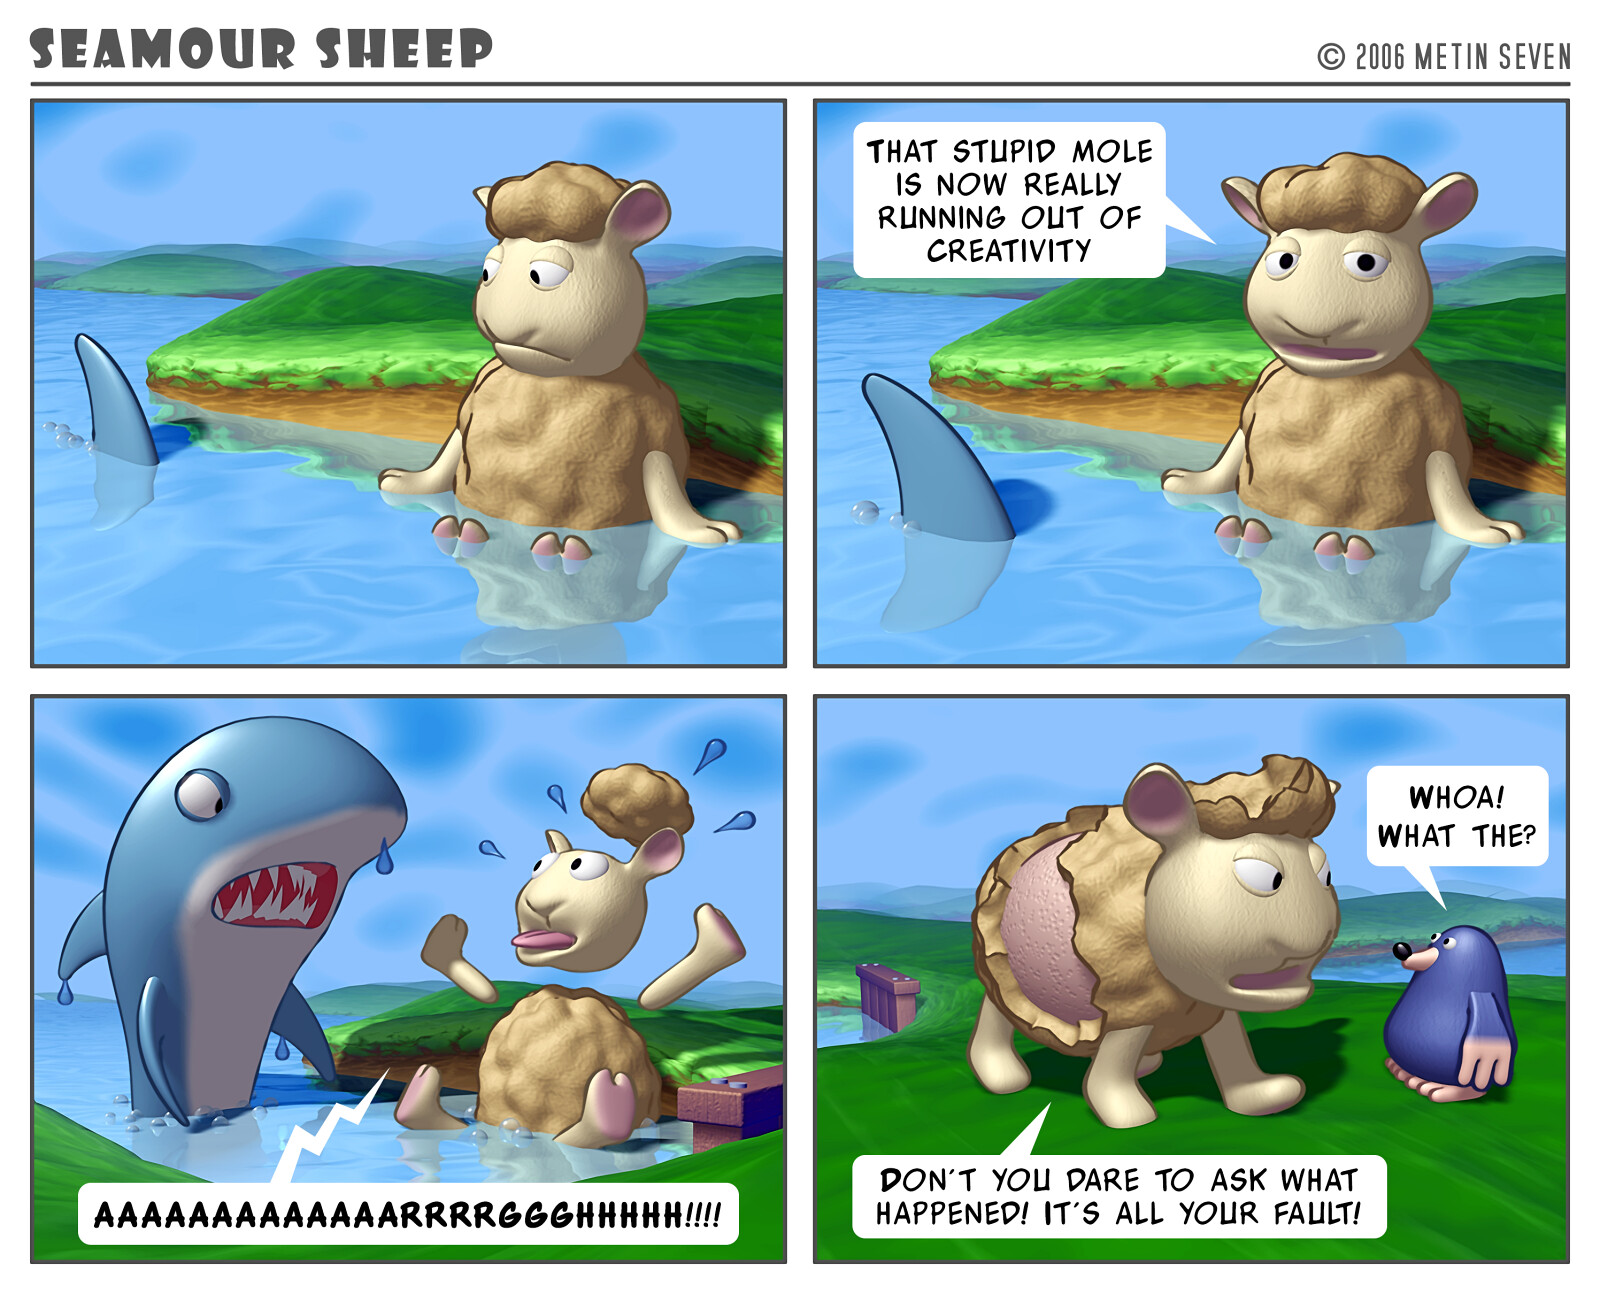 Seamour Sheep and Marty Mole comic strip episode: Shark